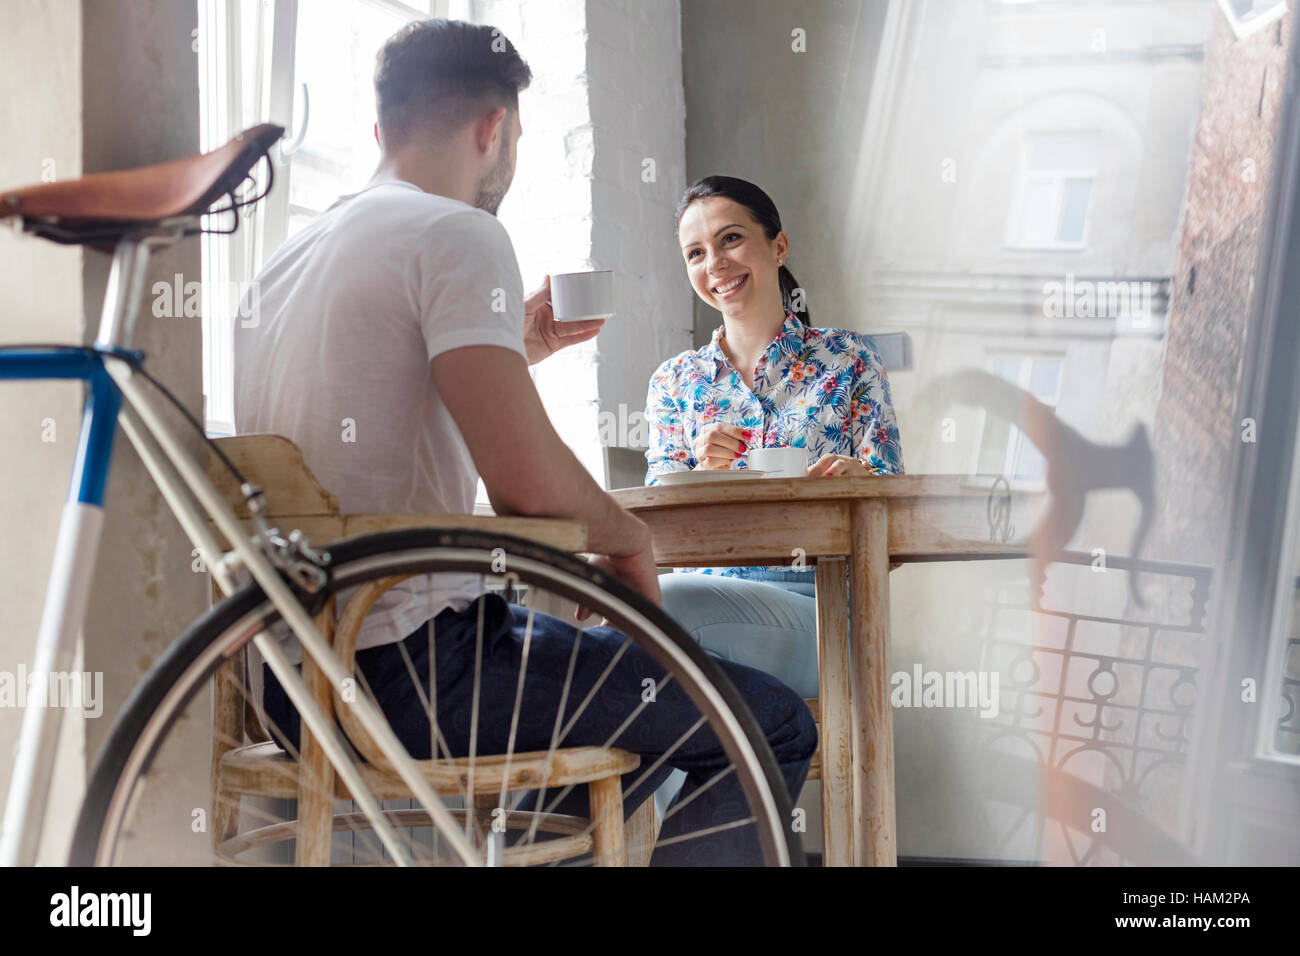 Couple drinking coffee and talking at table Stock Photo